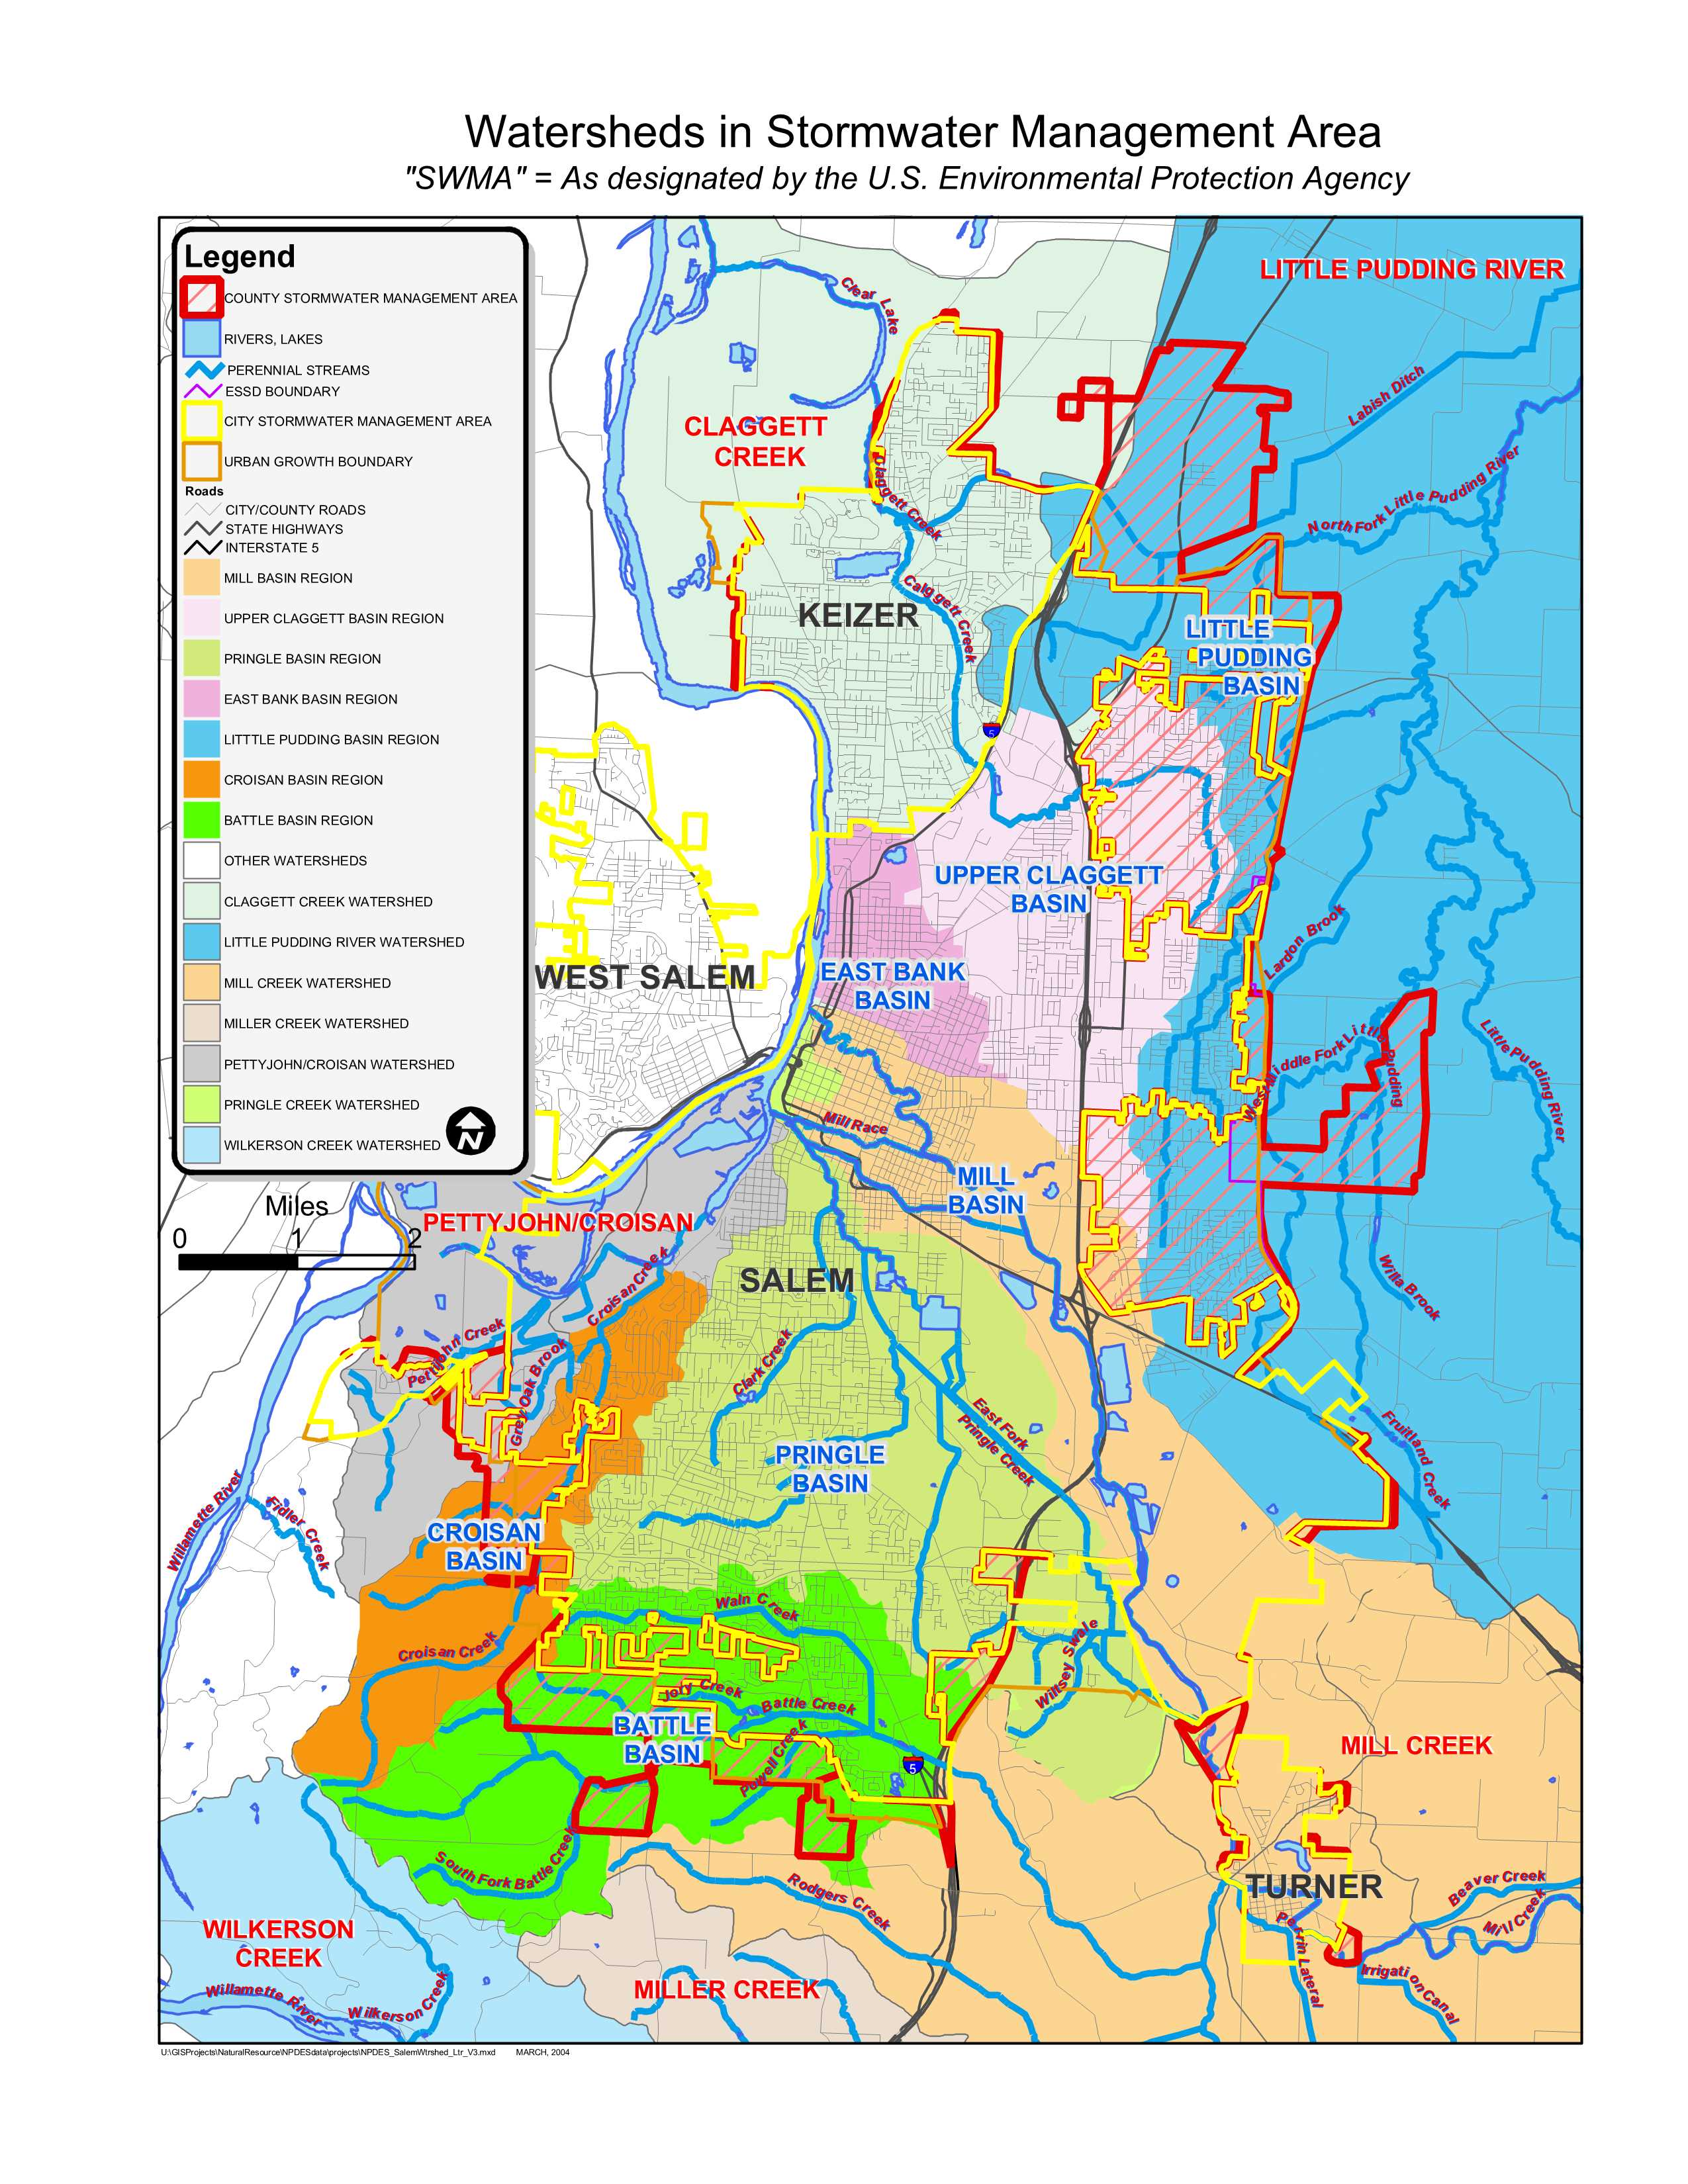 Watersheds in stormwater management area map